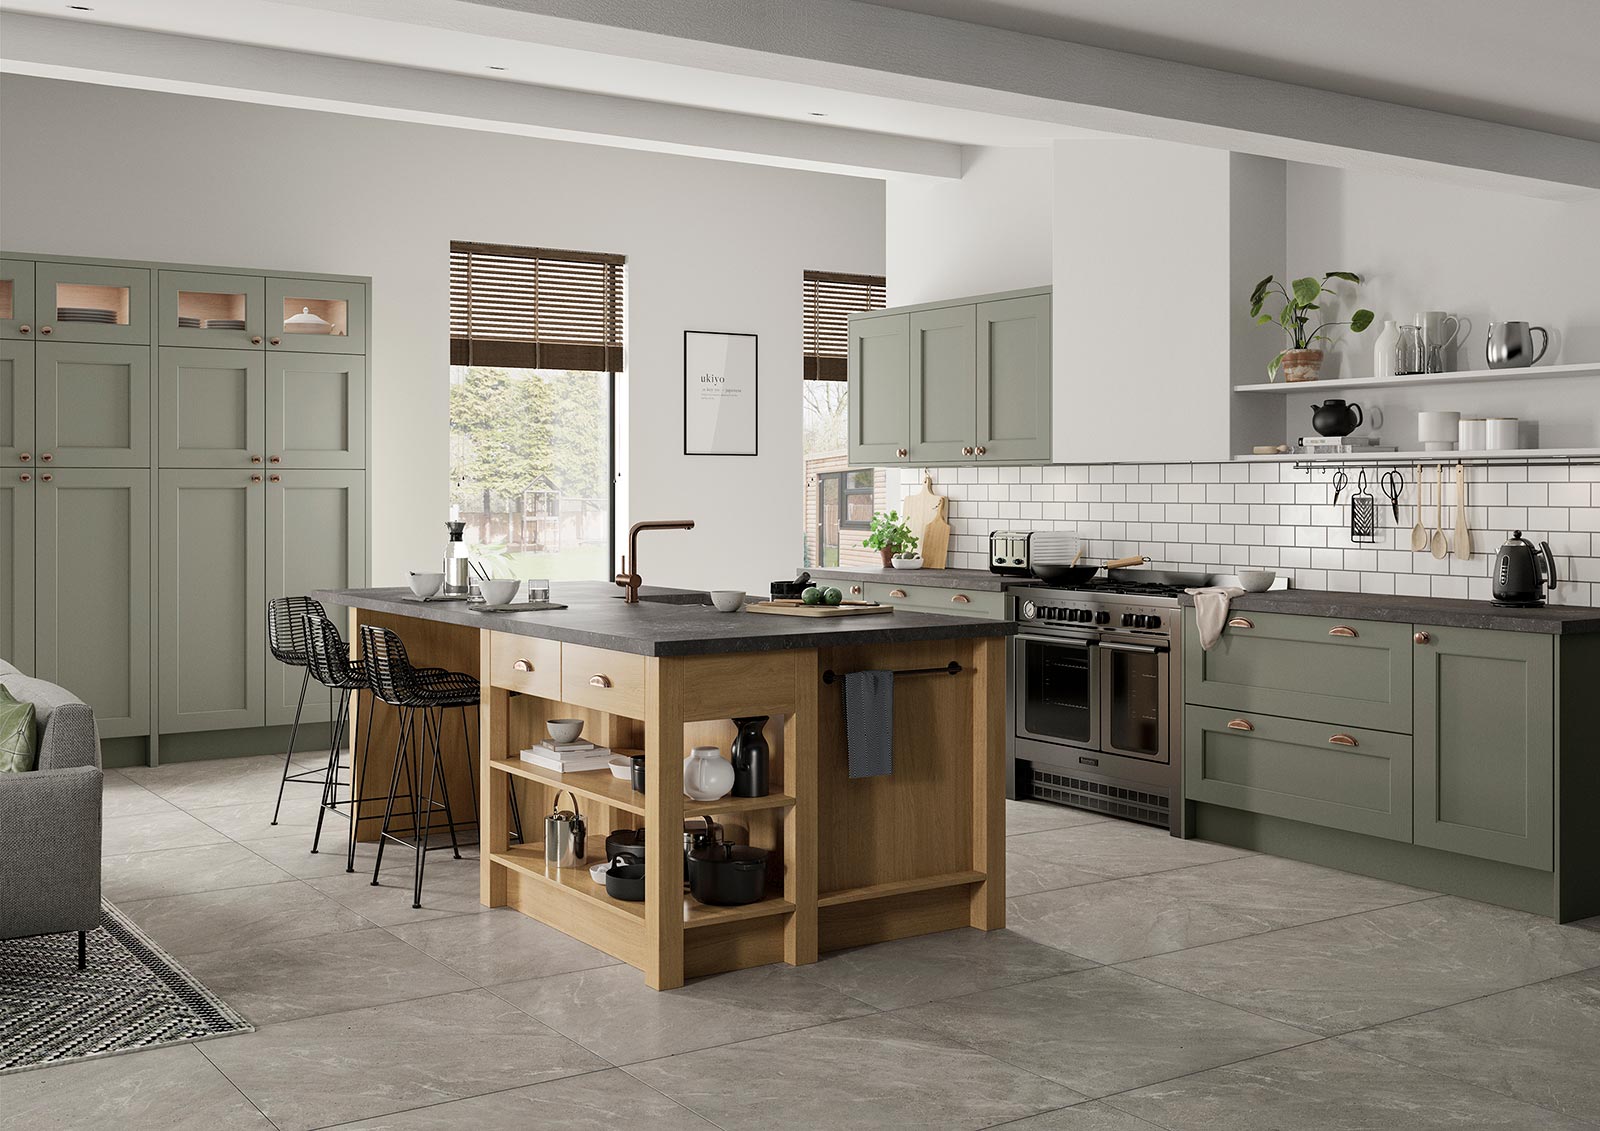 Mock Inframe shaker style kitchen painted heritage green